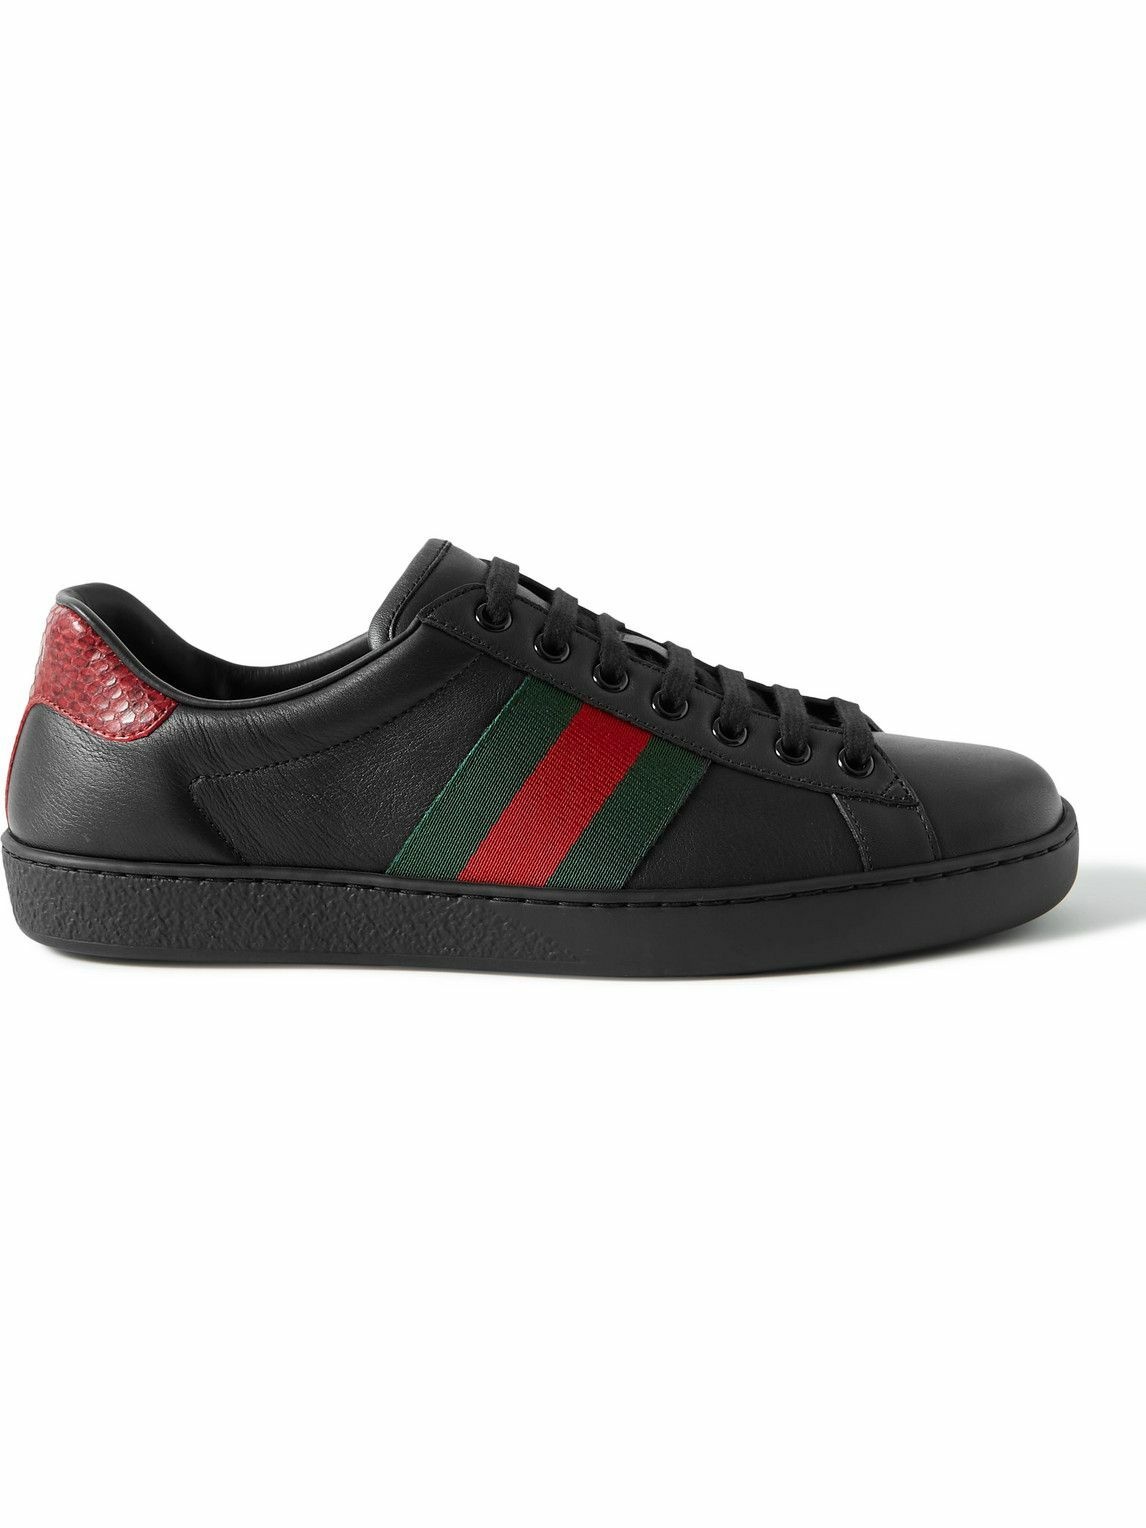 GUCCI - Ace Webbing-Trimmed Leather Sneakers - Black Gucci